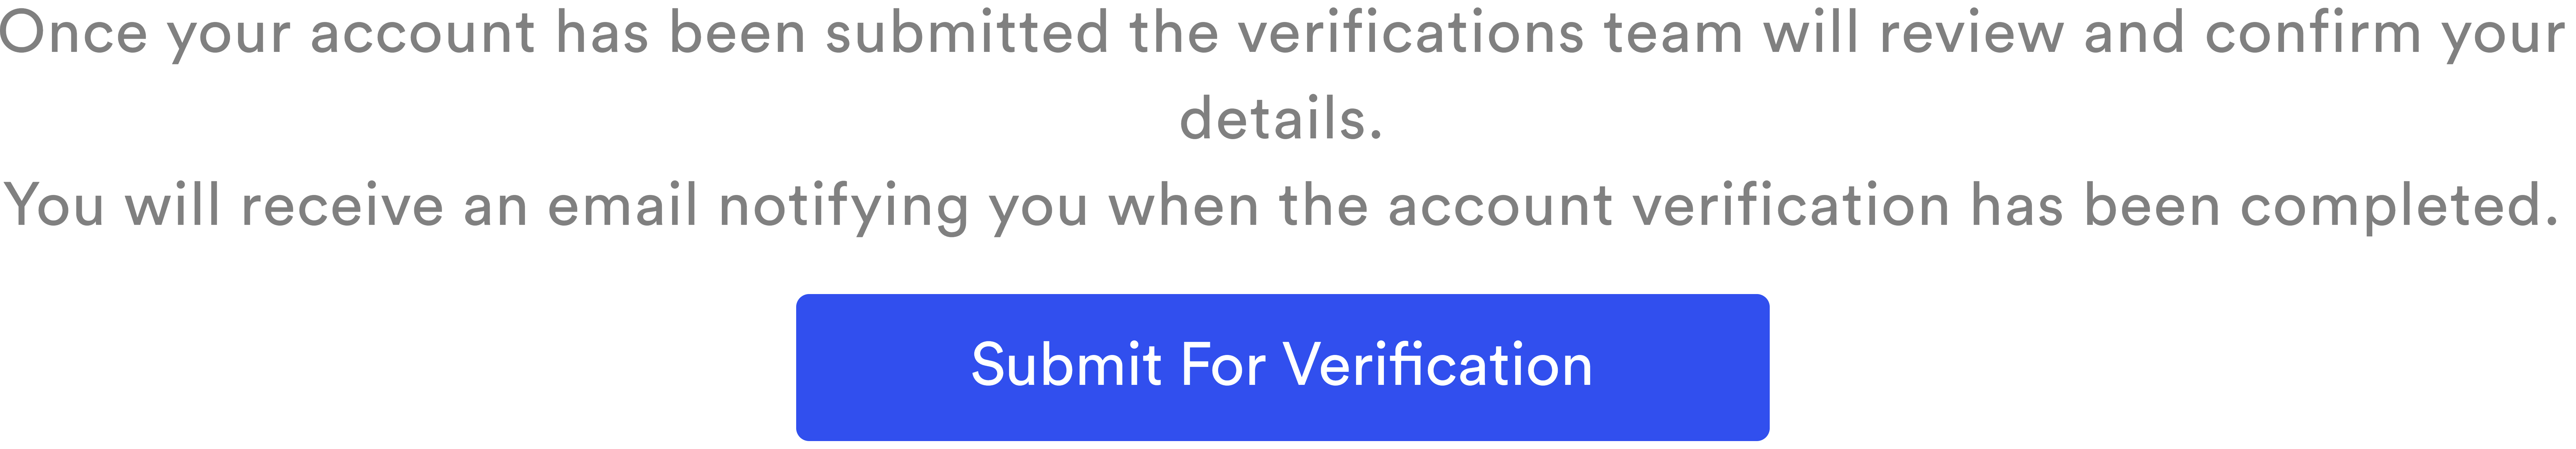 CoinSpot_Submit_For_Verification.png